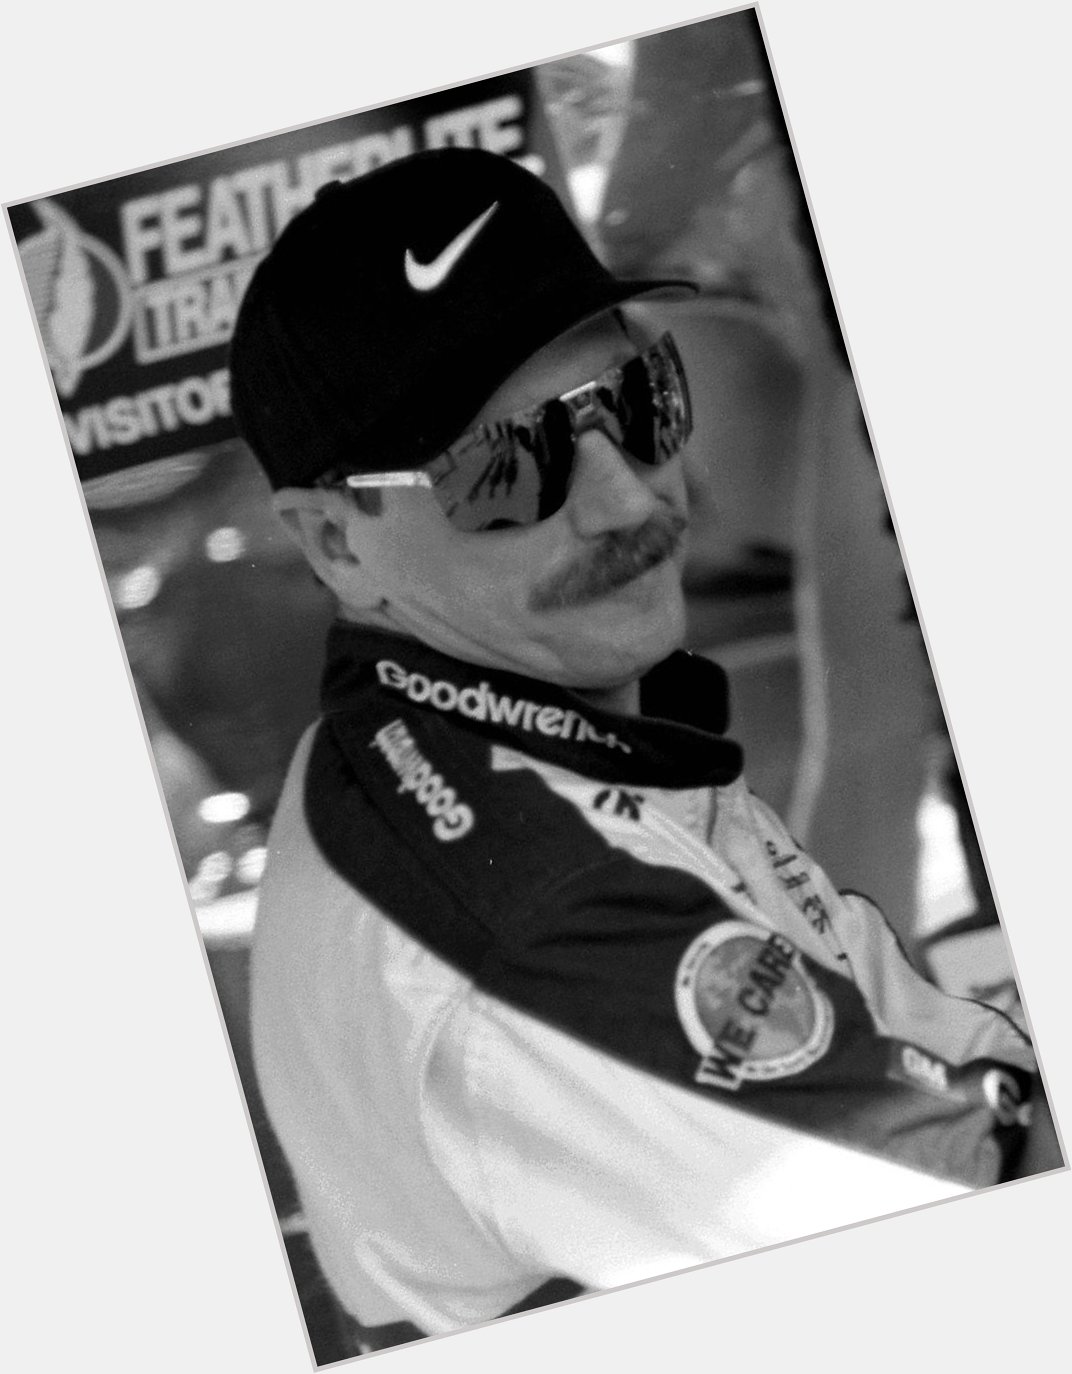 Happy birthday to the legend himself, Ralph Dale Earnhardt 